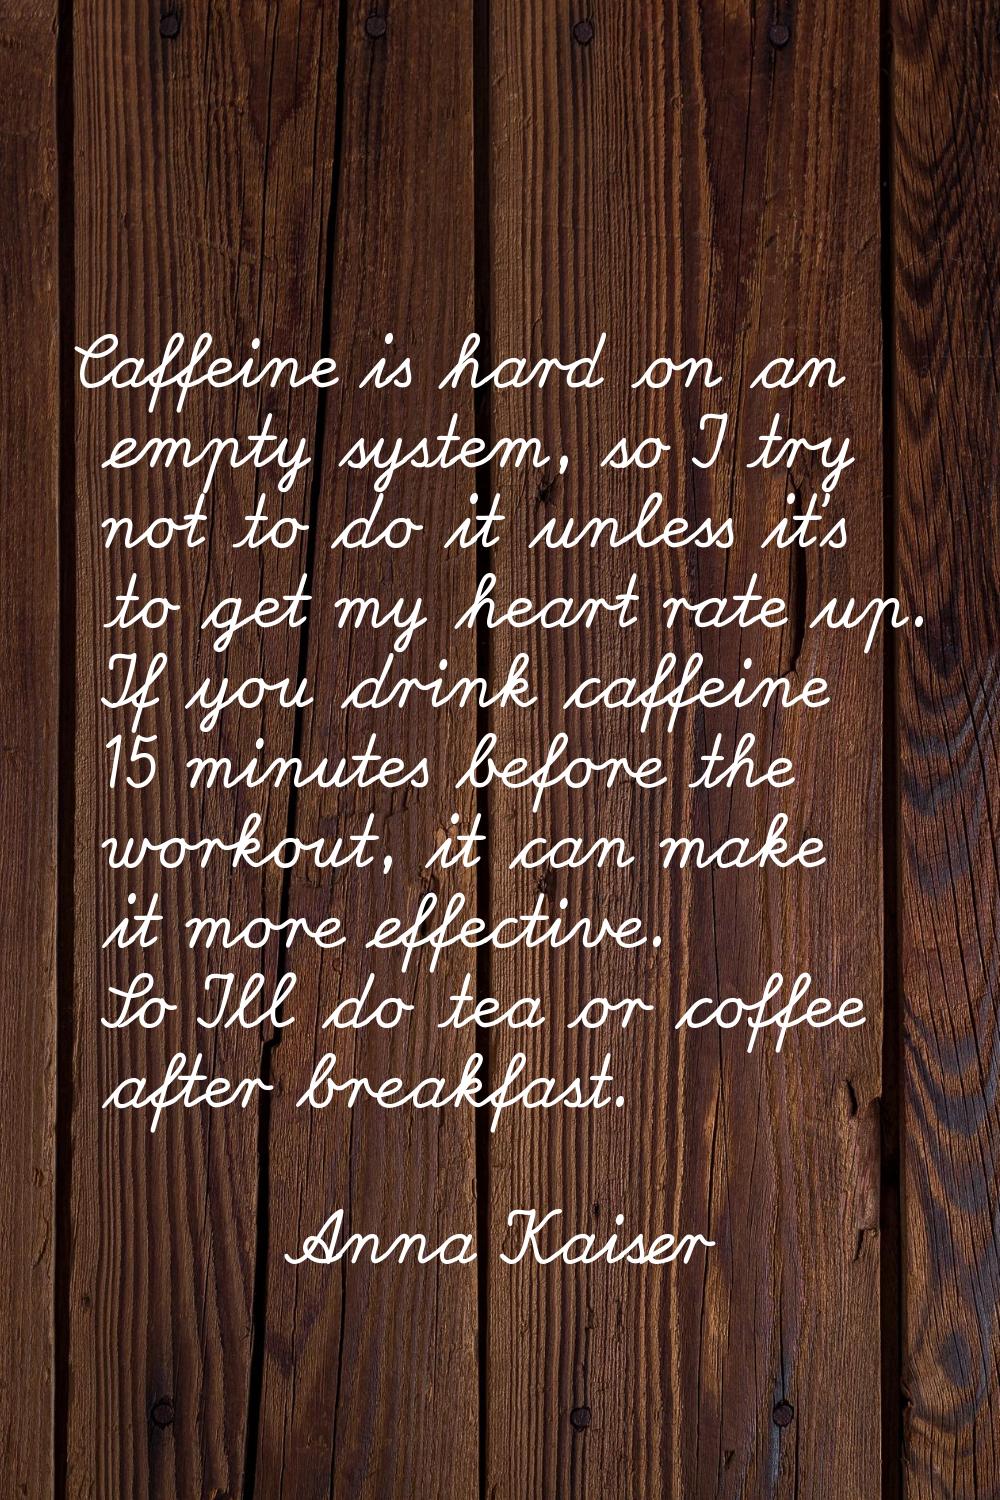 Caffeine is hard on an empty system, so I try not to do it unless it's to get my heart rate up. If 